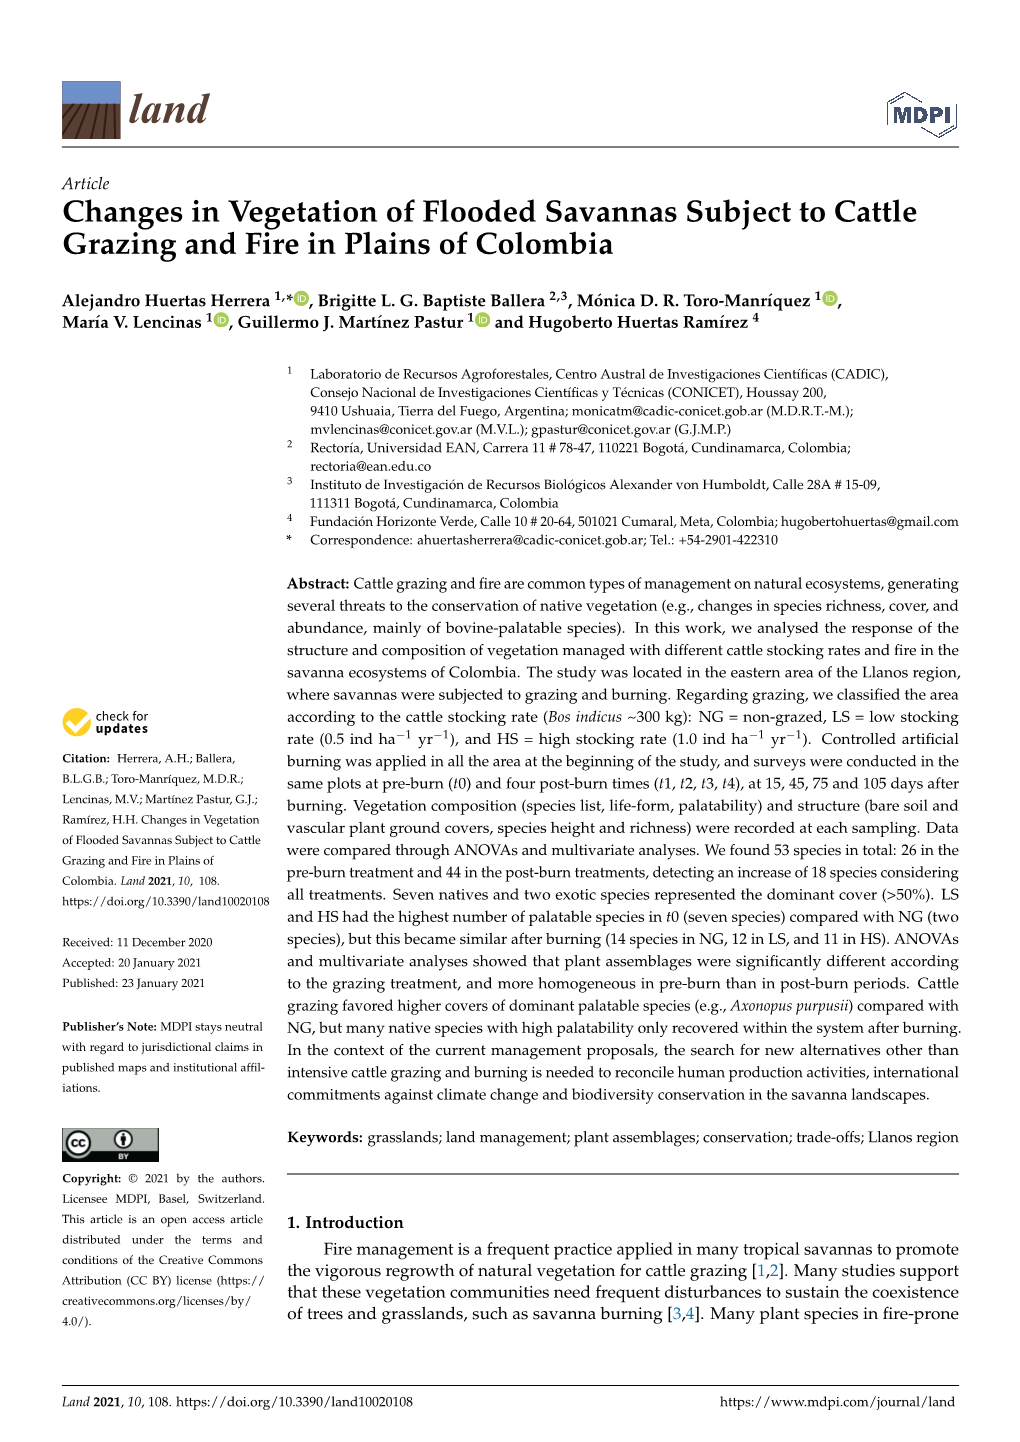 Changes in Vegetation of Flooded Savannas Subject to Cattle Grazing and Fire in Plains of Colombia